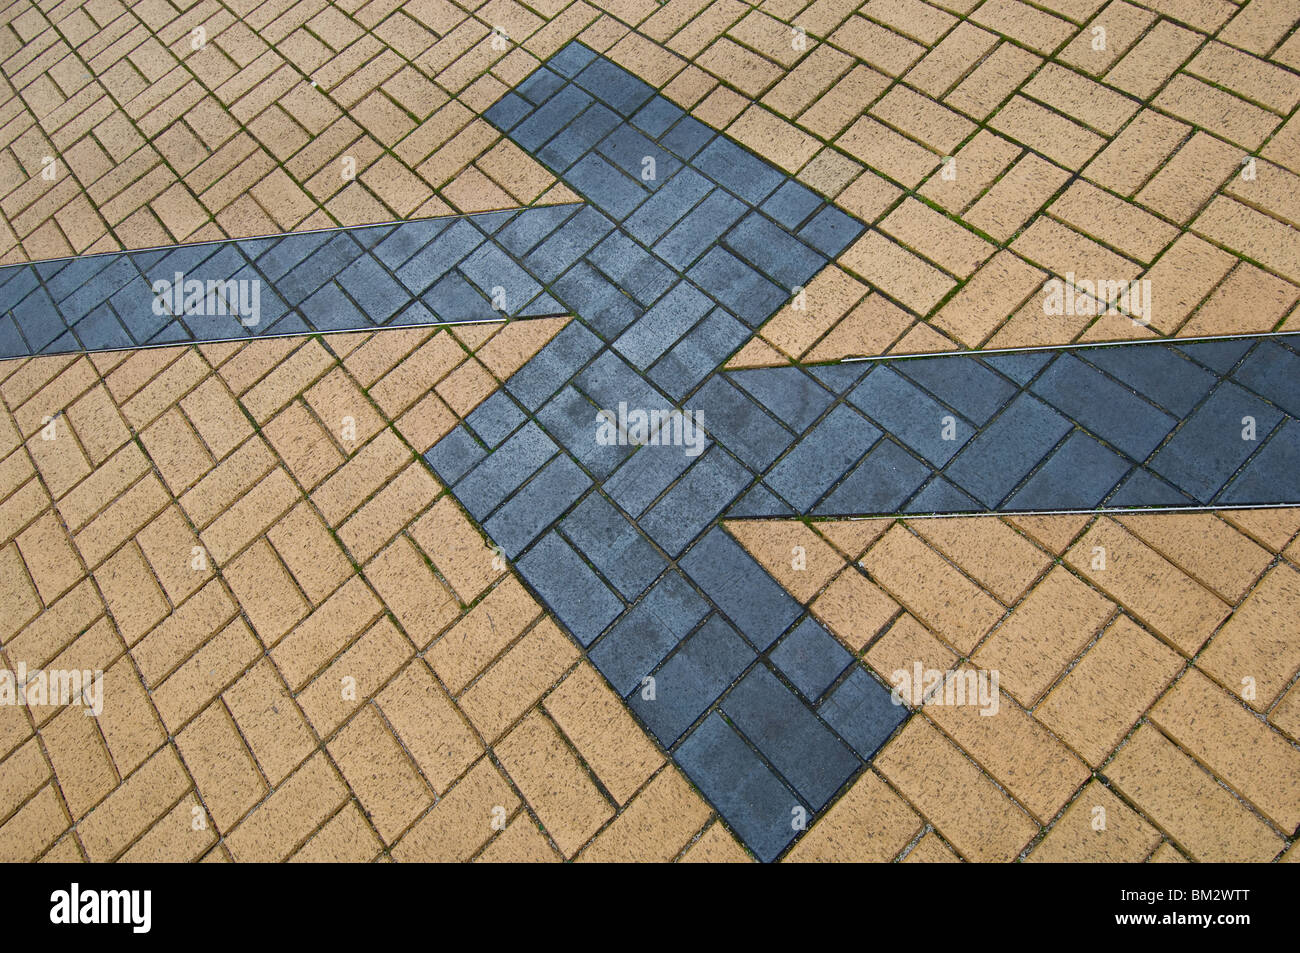 Colored blocks formed in a station platform in the shape of arrows Stock Photo